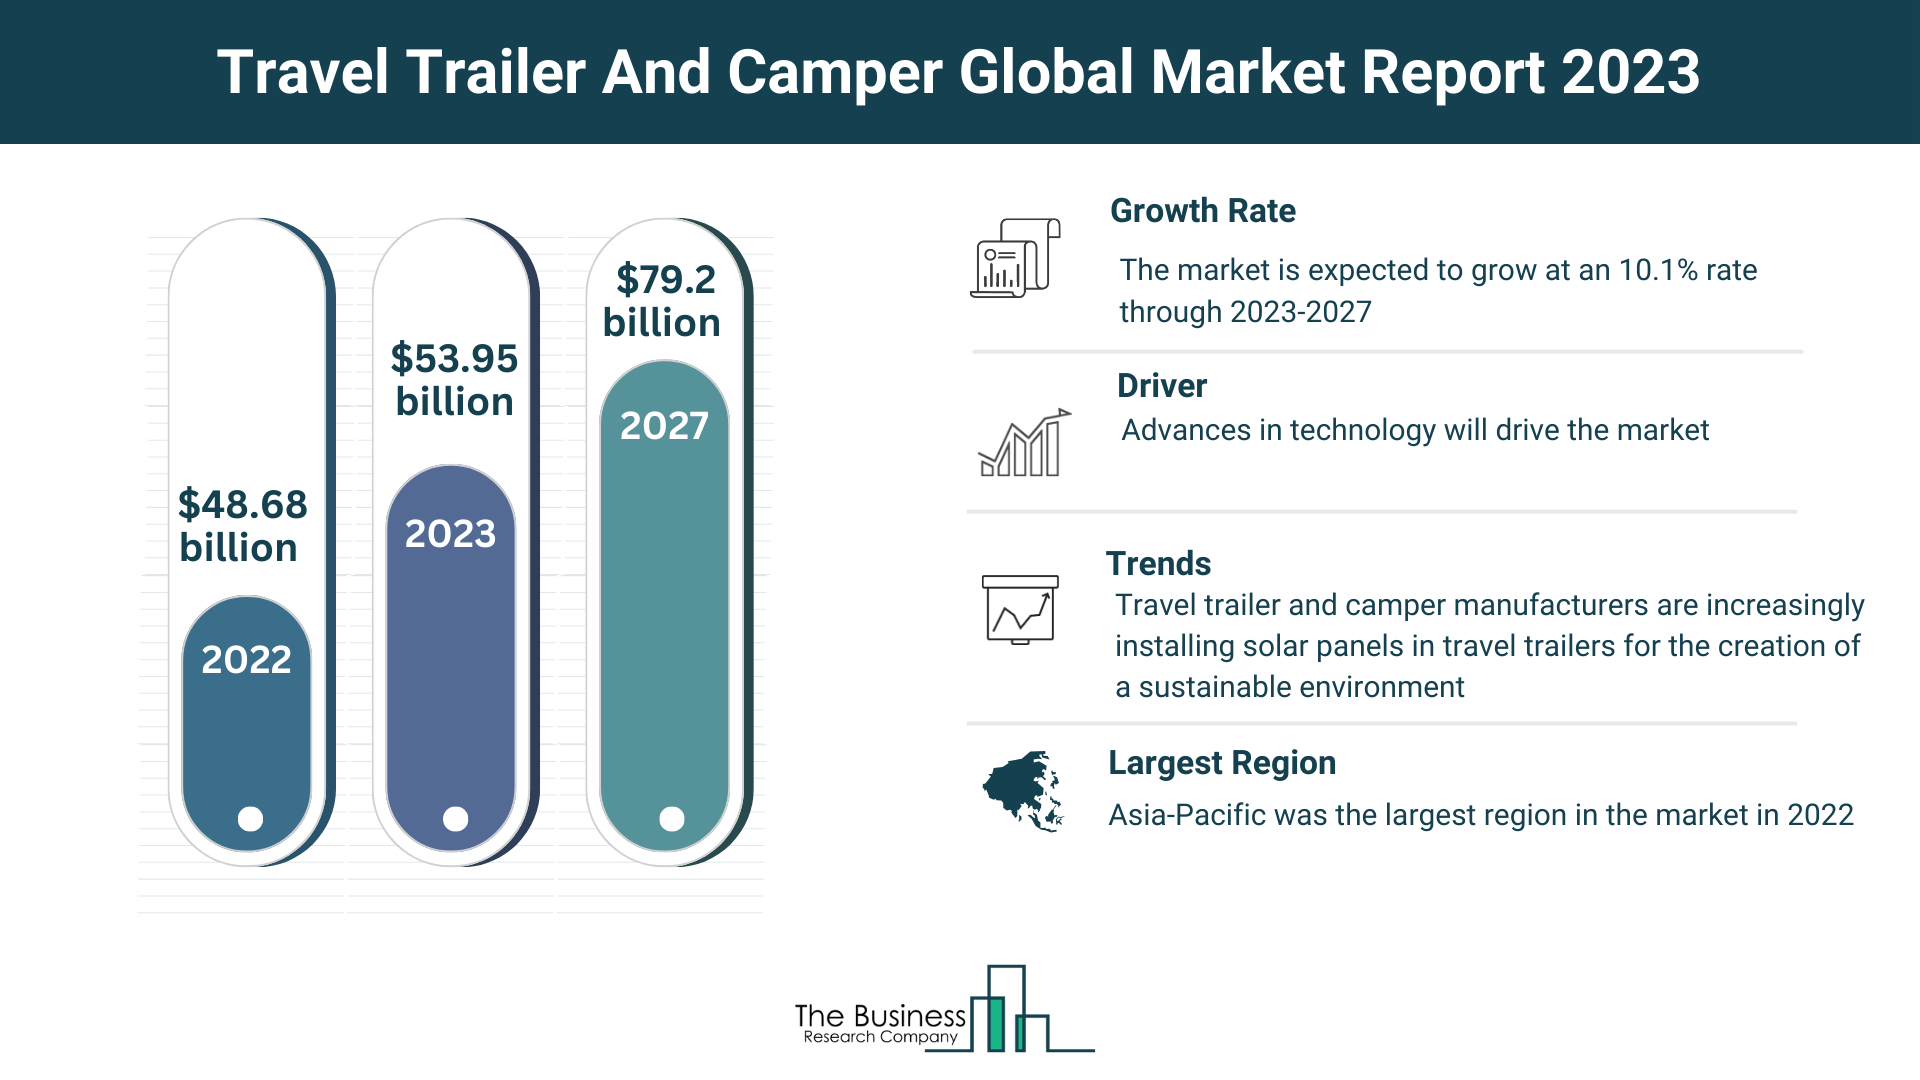 Understand How The Travel Trailer And Camper Market Is Set To Grow In Through 2023-2032